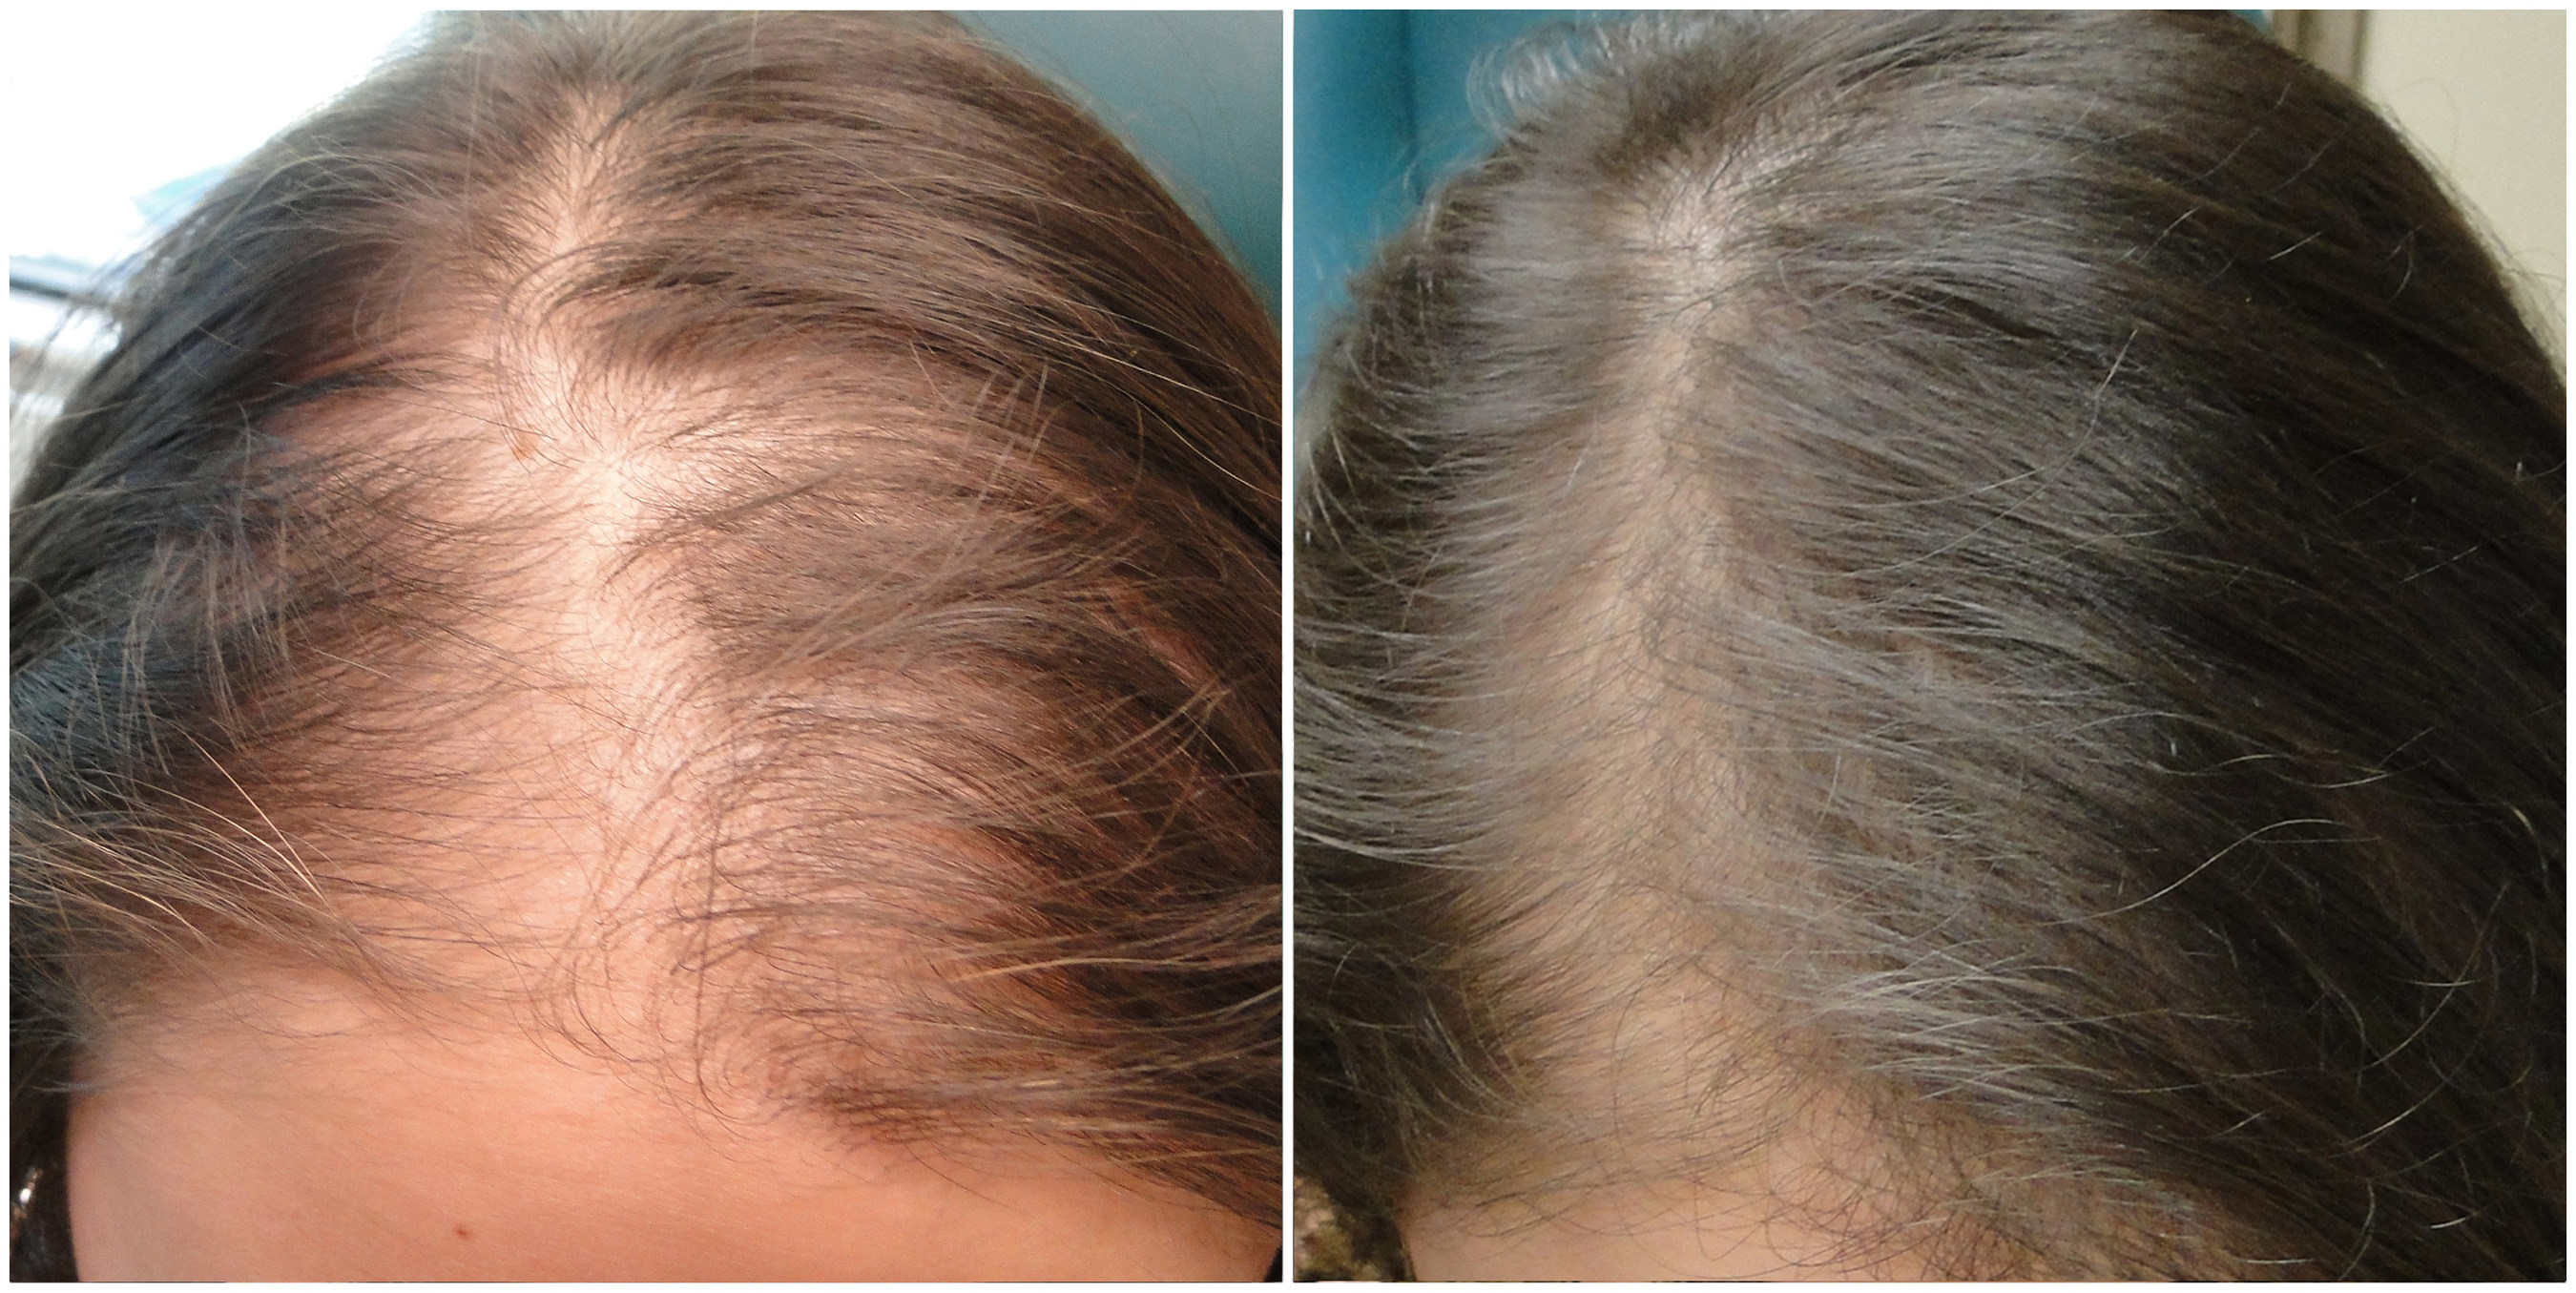 New Research Alert: PRP For Non Surgical Hair Restoration